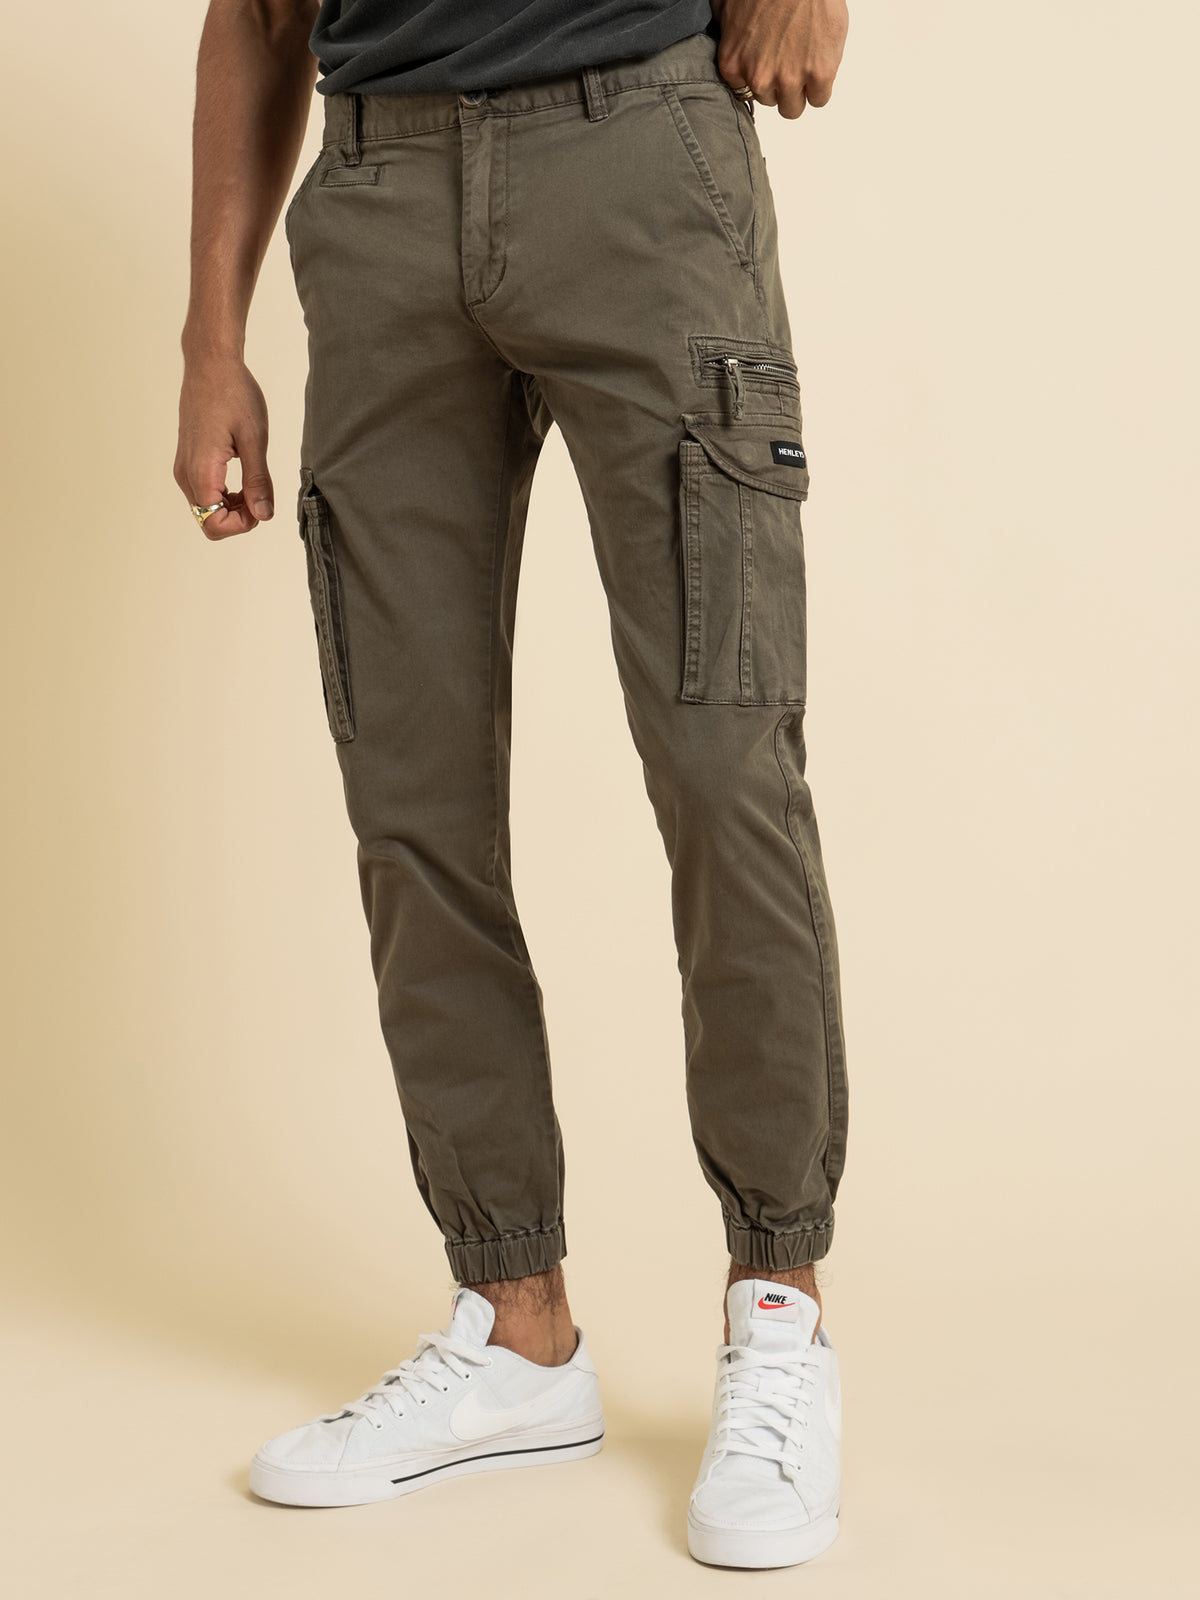 Eagle Cargo Pants in Army Green